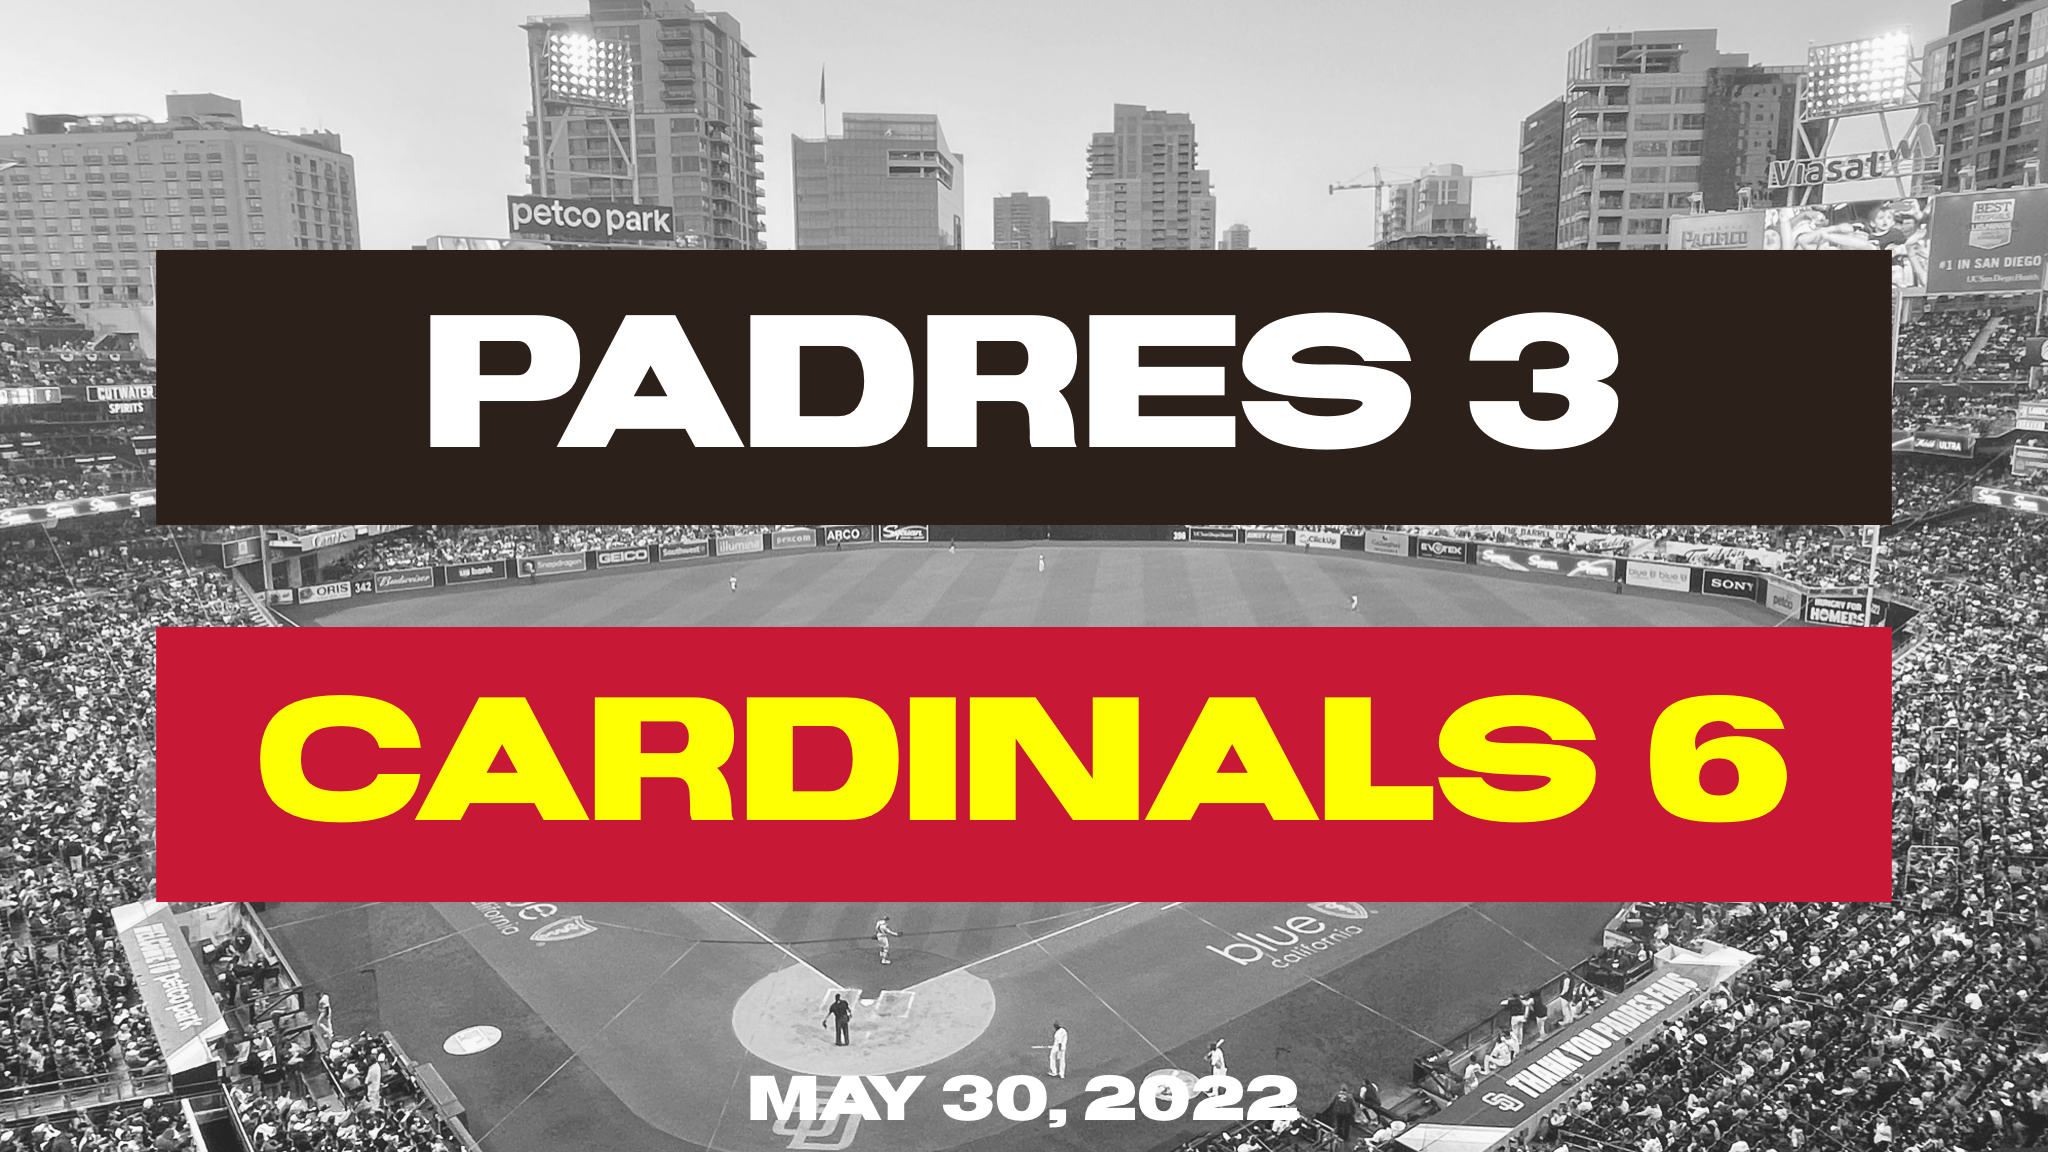 Final score graphic with Petco Park in background. Final: Padres 3, Cardinals 6